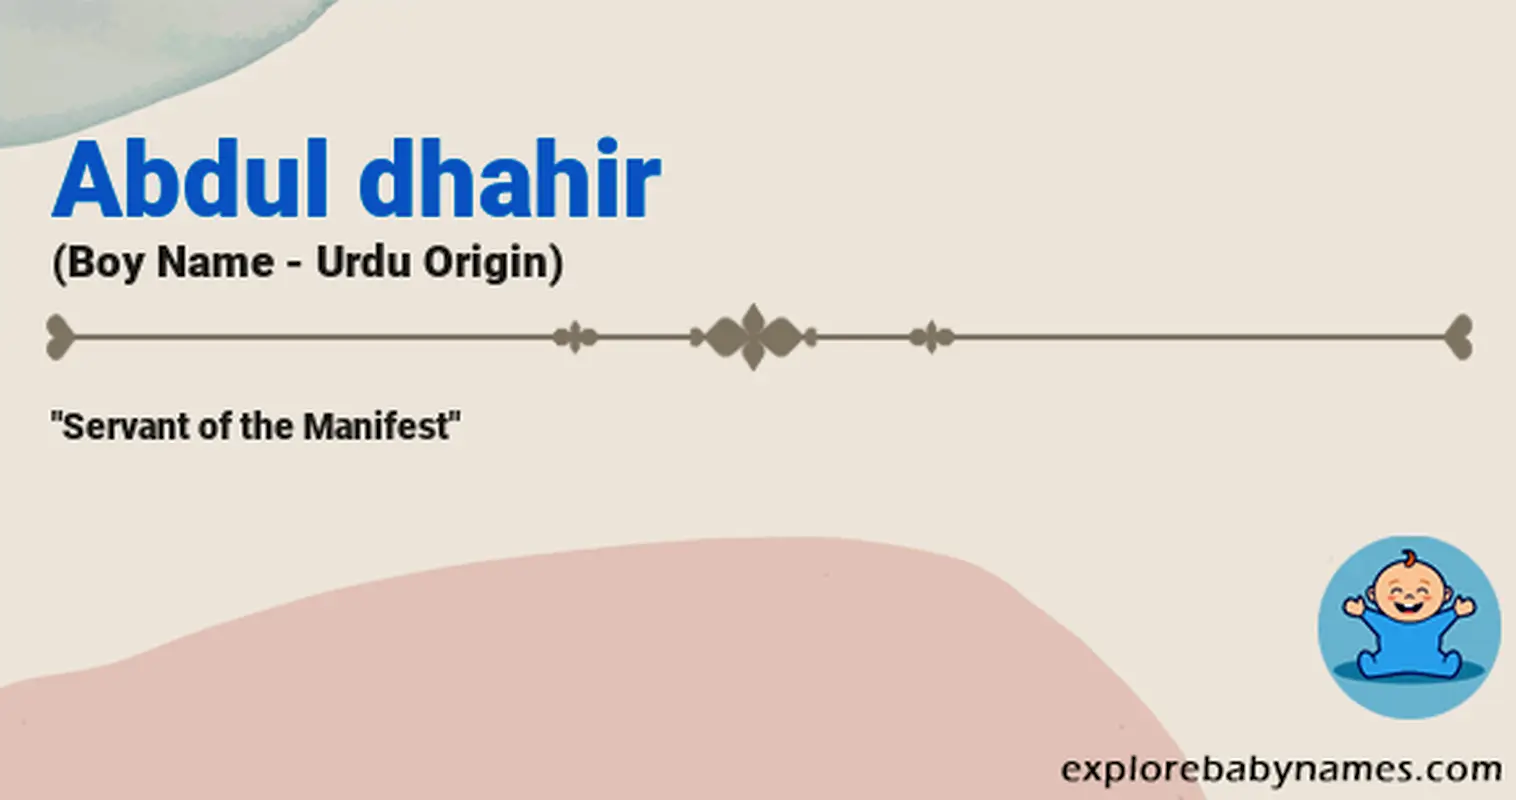 Meaning of Abdul dhahir